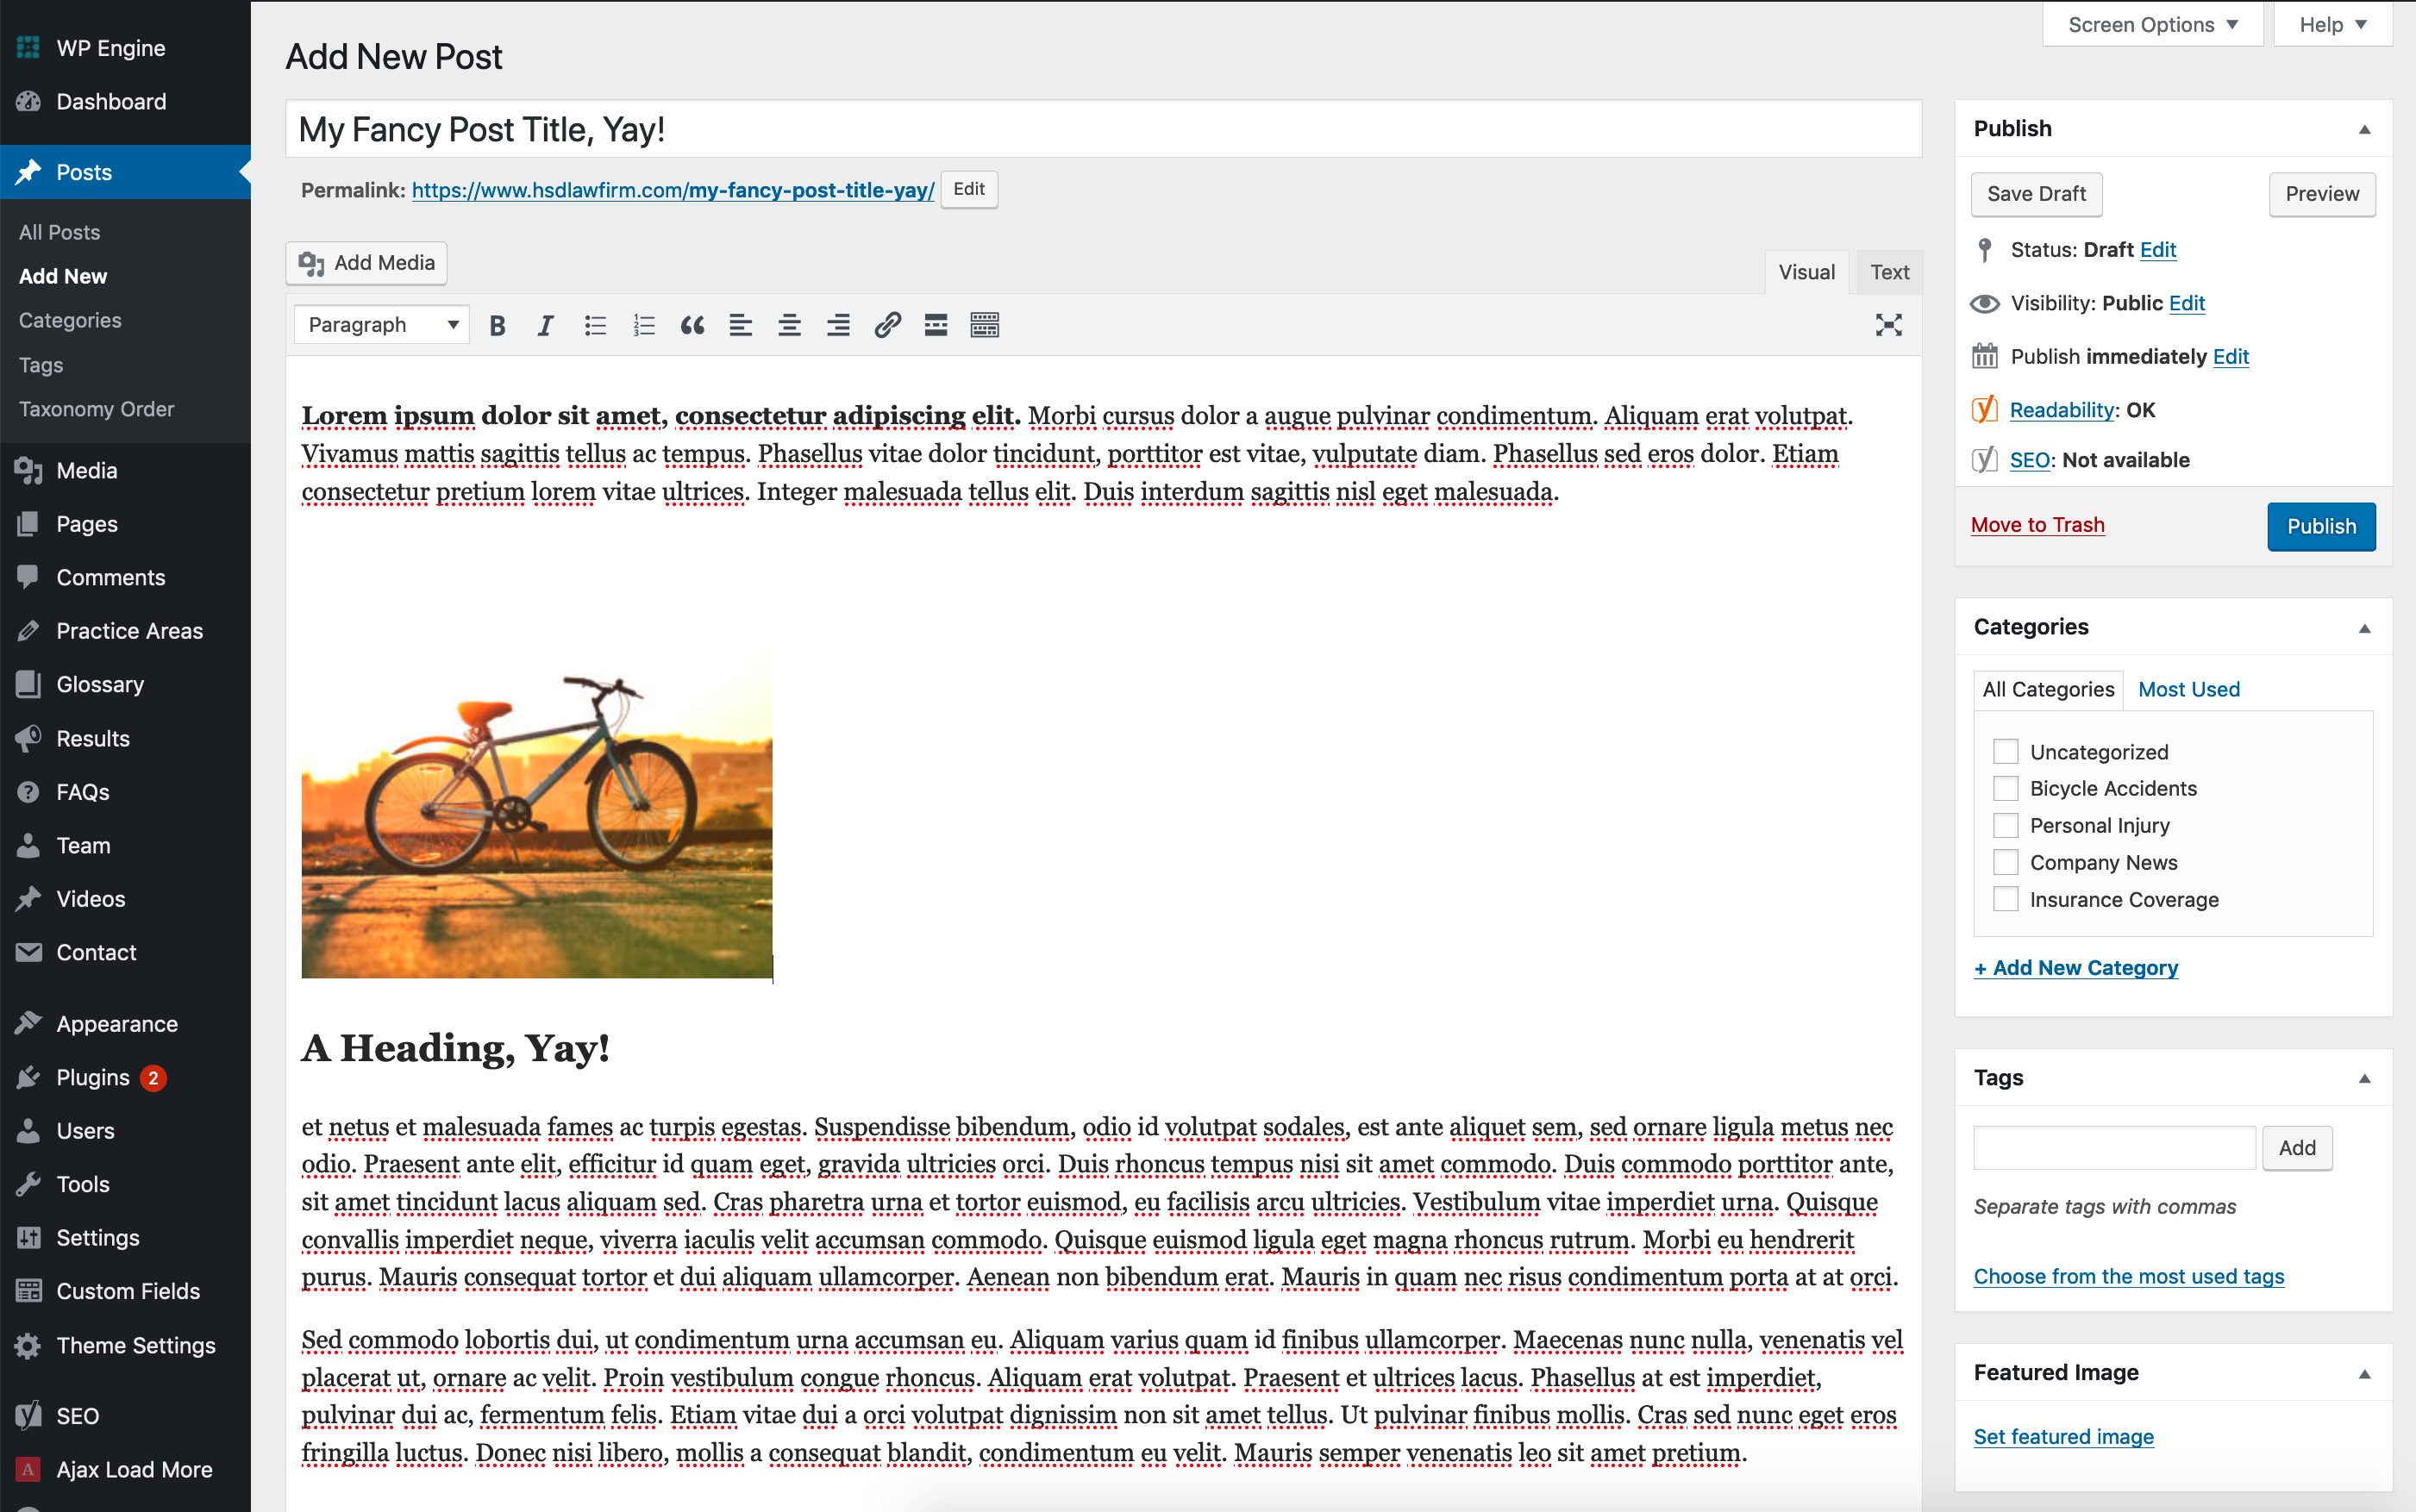 screenshot of the wordpress editor with an image added.